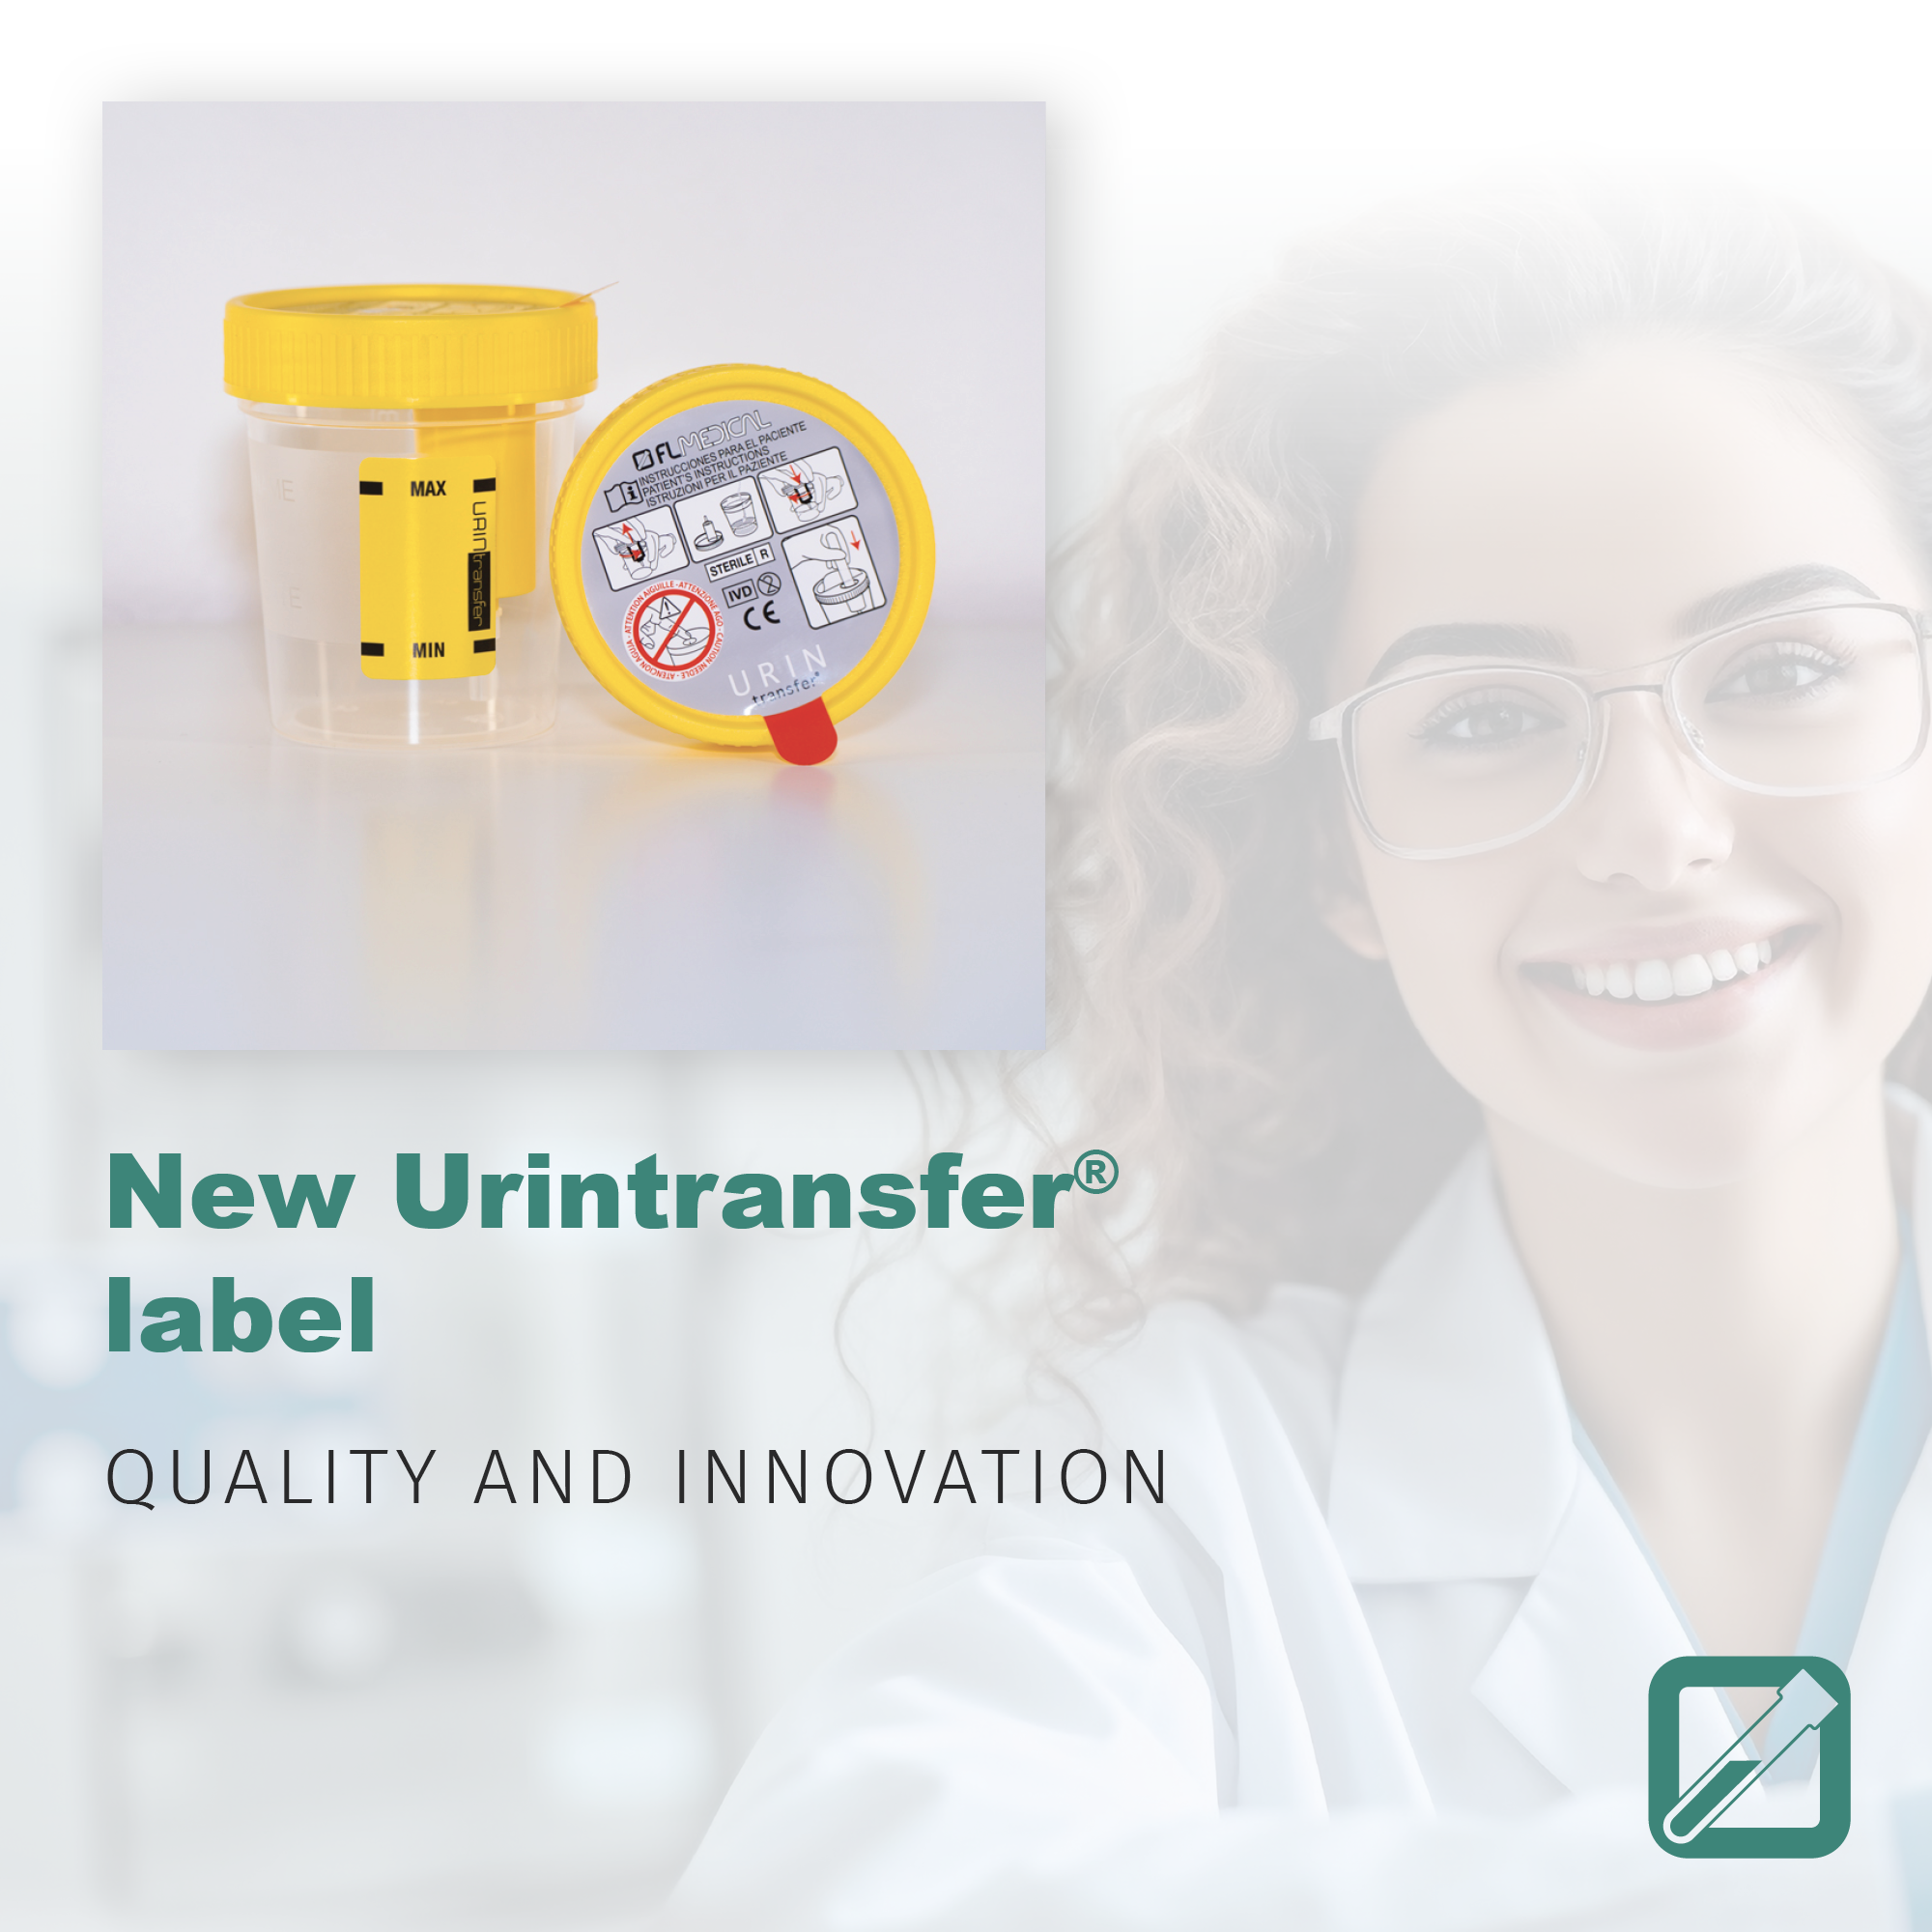 New Urintransfer® label: quality and innovation